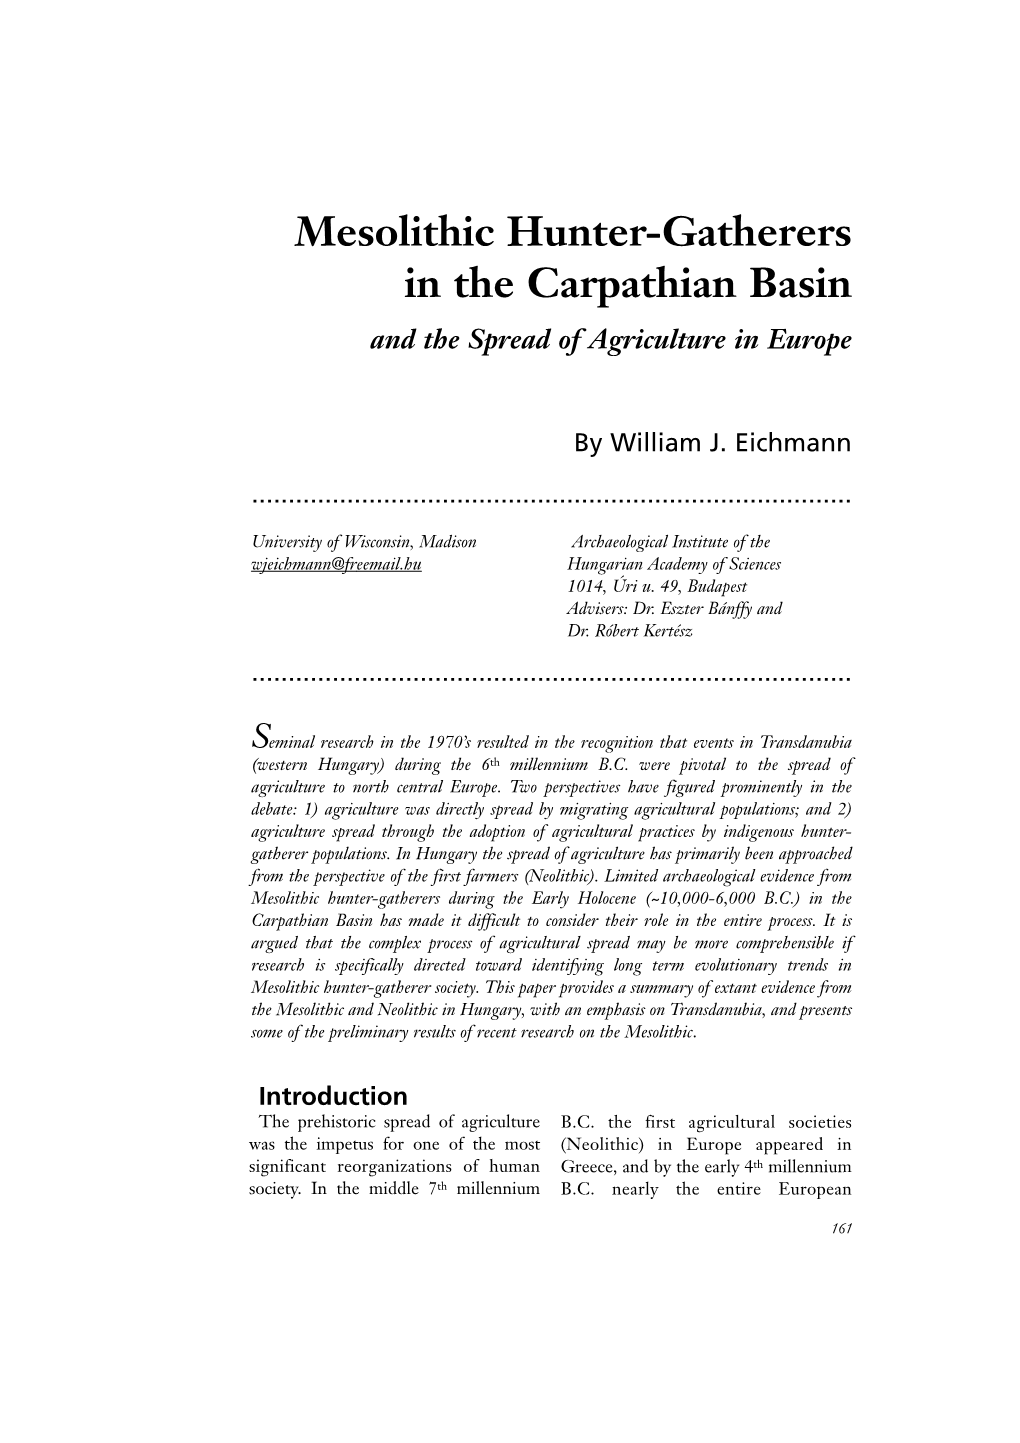 Mesolithic Hunter-Gatherers in the Carpathian Basin and the Spread of Agriculture in Europe